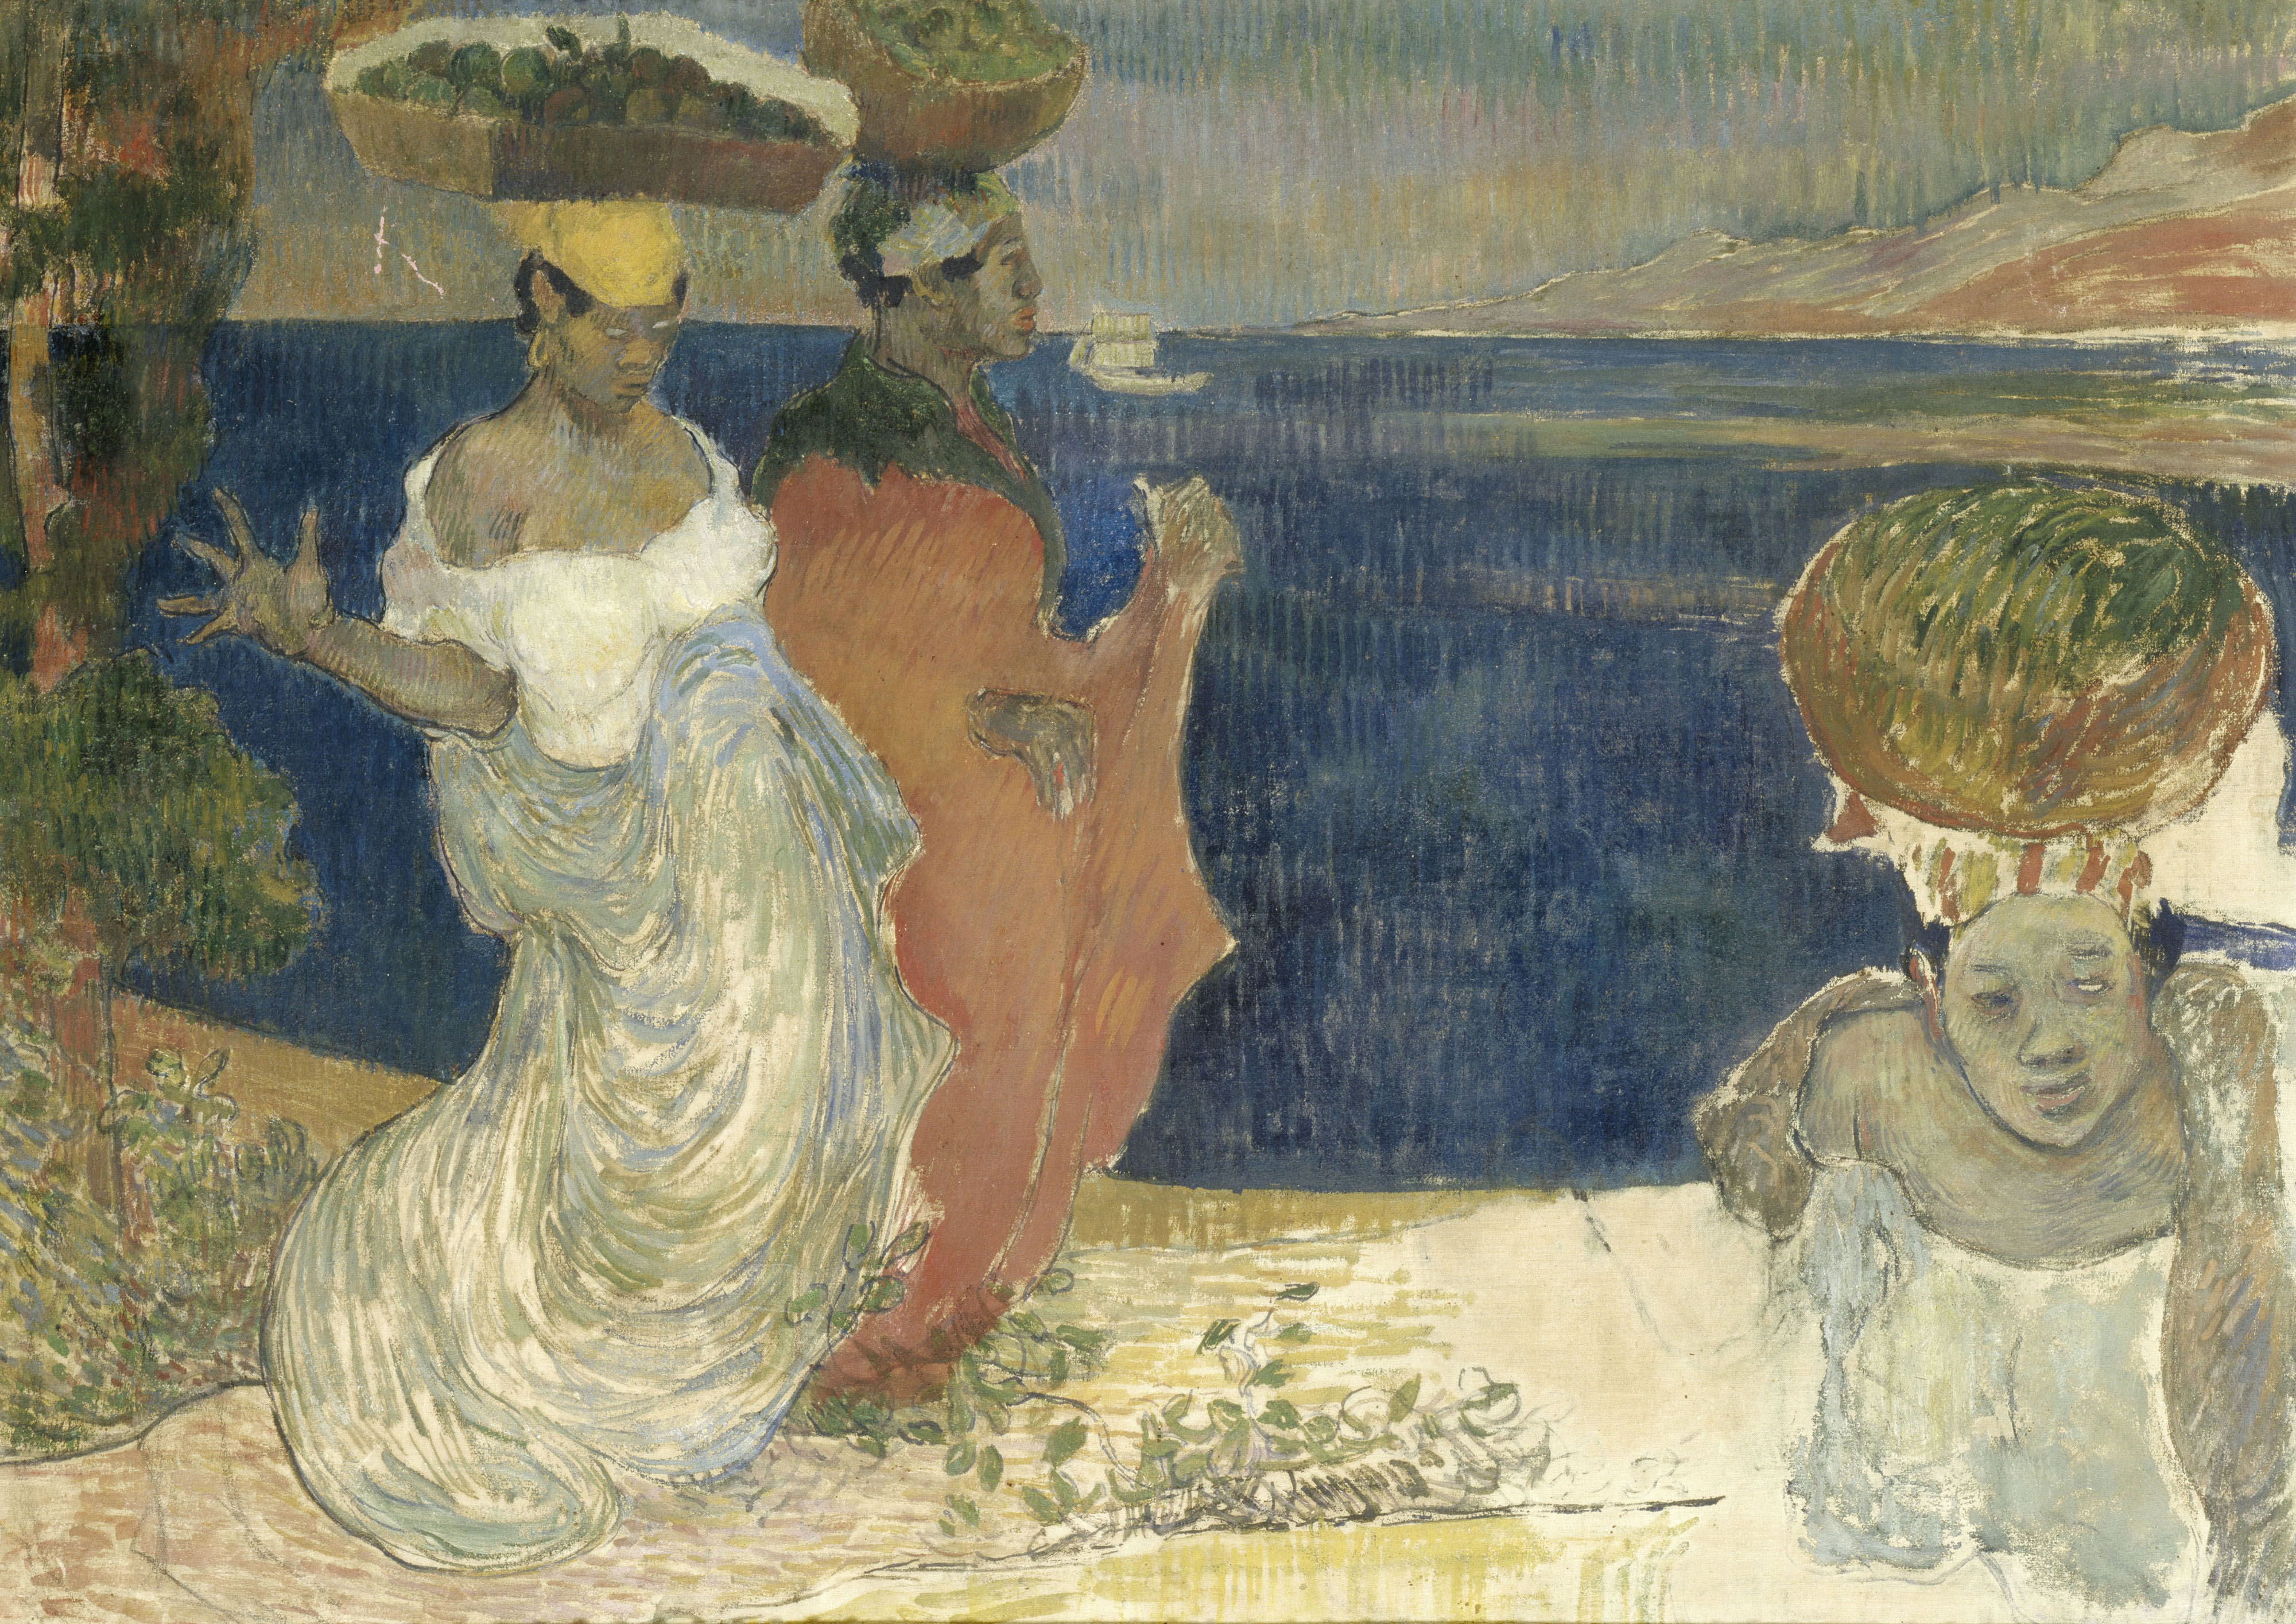 Donne in riva al mare, schizzo by Charles Laval - 1887-88 - 65 × 91.5 cm Van Gogh Museum